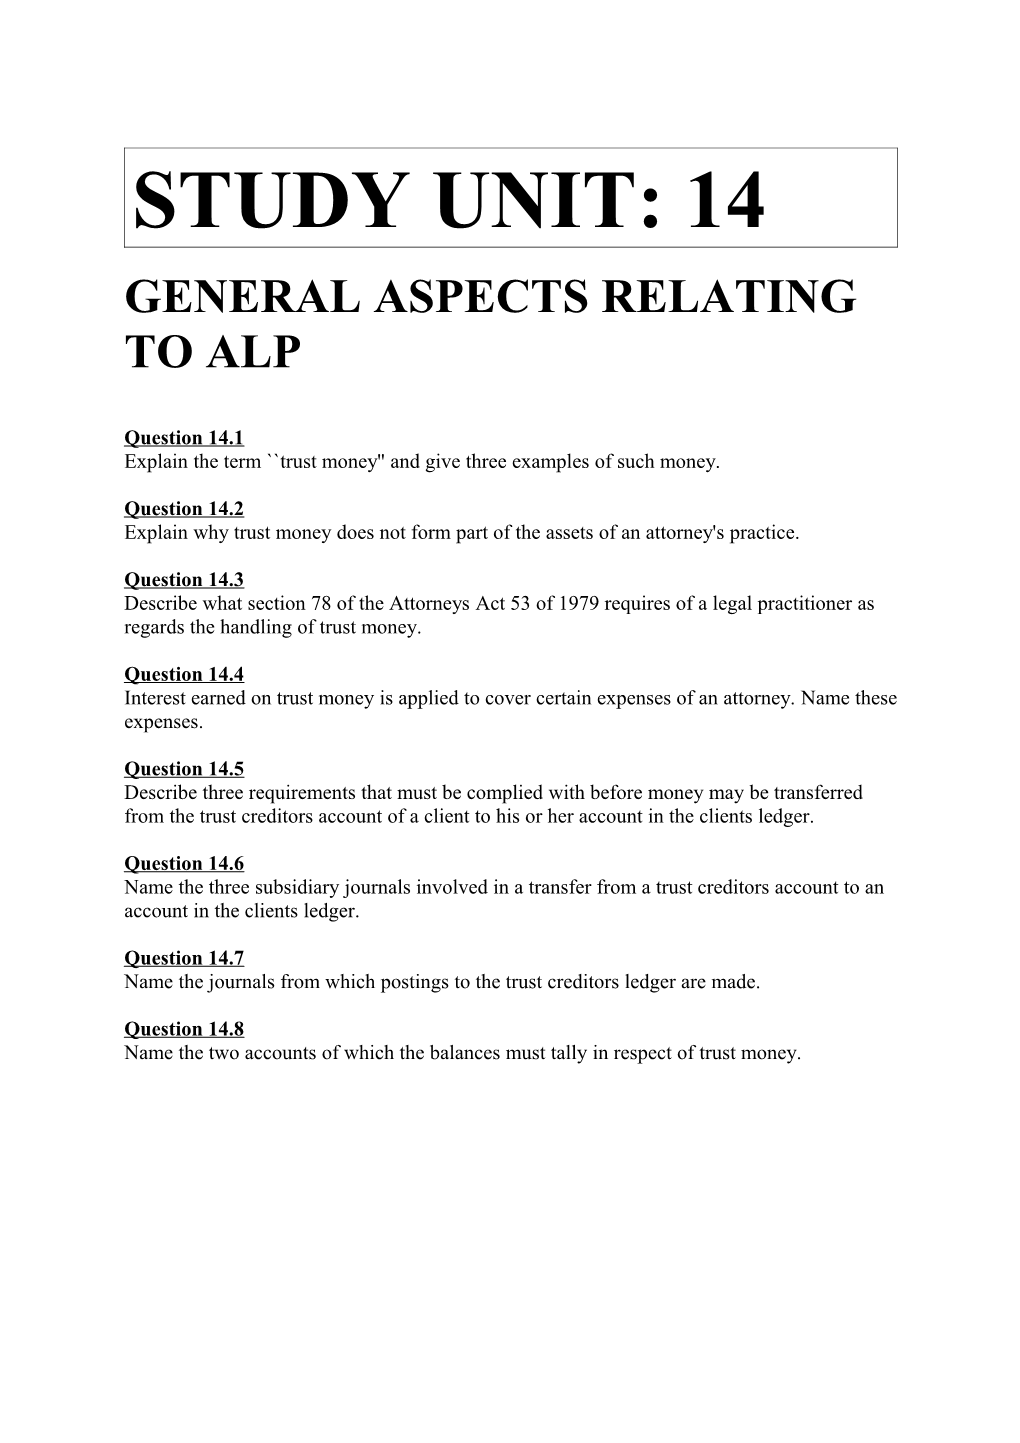 General Aspects Relating to Alp